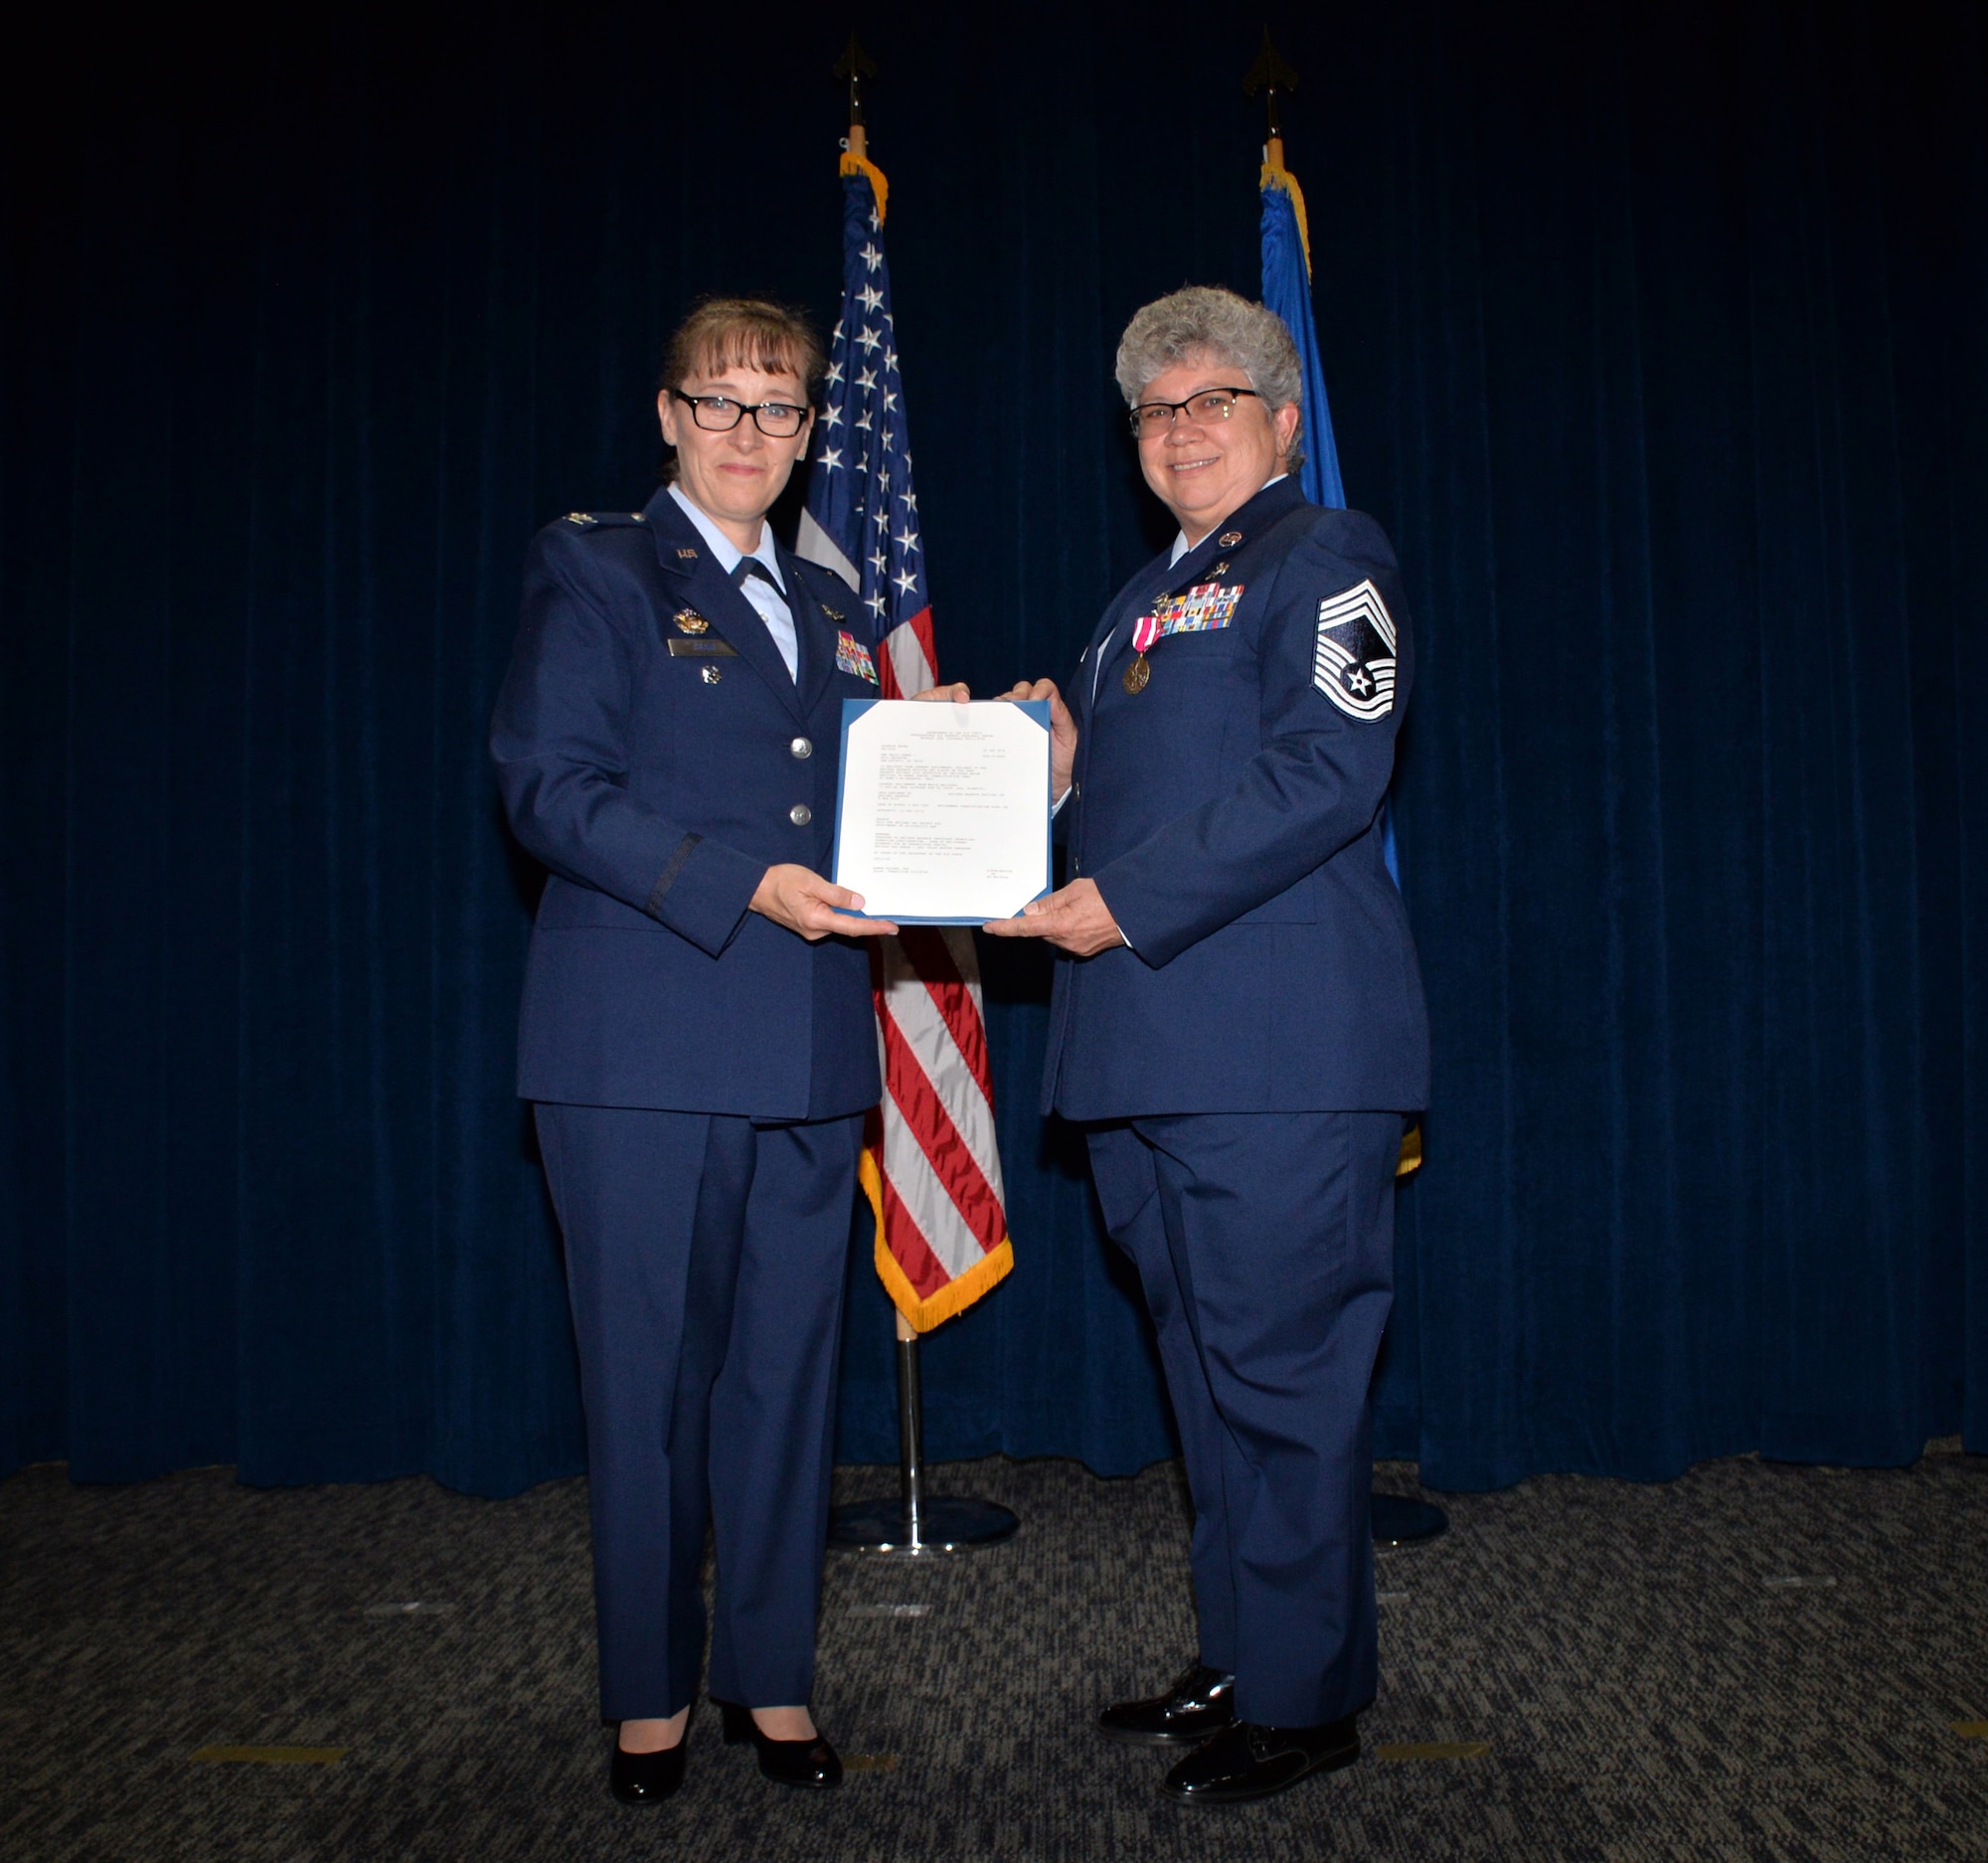 Col. Lisa M. Craig, Air Force Reserve Command director of manpower, personnel, and services, presented the retirement order to Chief Master Sgt. Debra L. Kelly, 74th Aerial Port Squadron chief enlisted manager, upon the occasion of her retirement Aug. 3, 2019 at Joint Base San Antonio-Lackland, Texas.